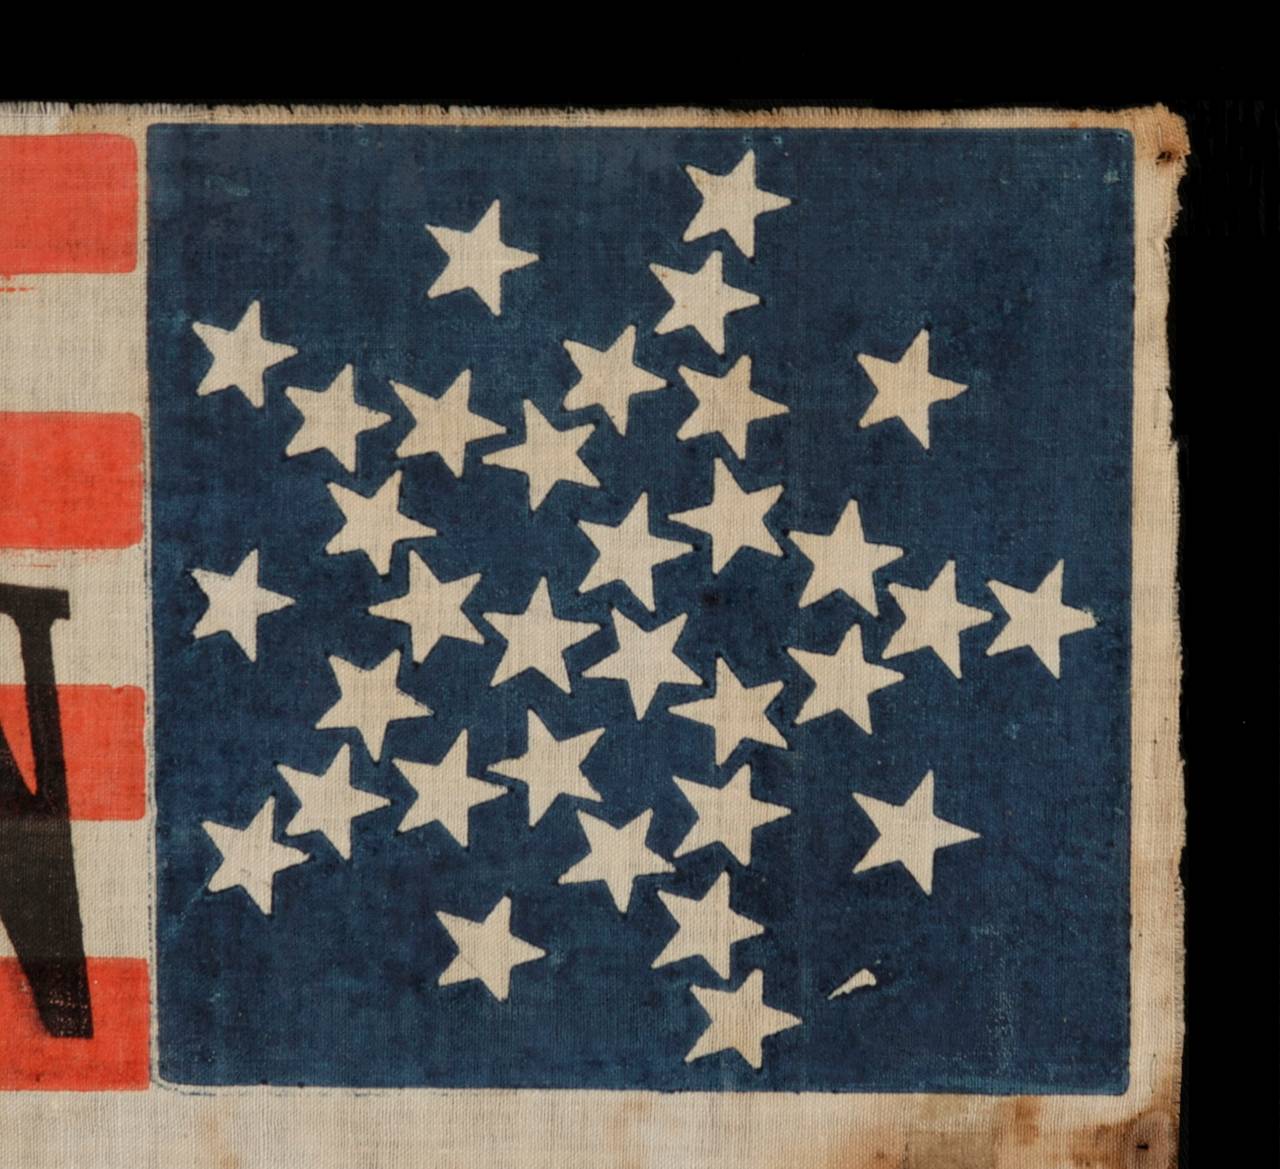 American 33 Star Flag Made for the 1860 Campaign of Lincoln and Hamlin